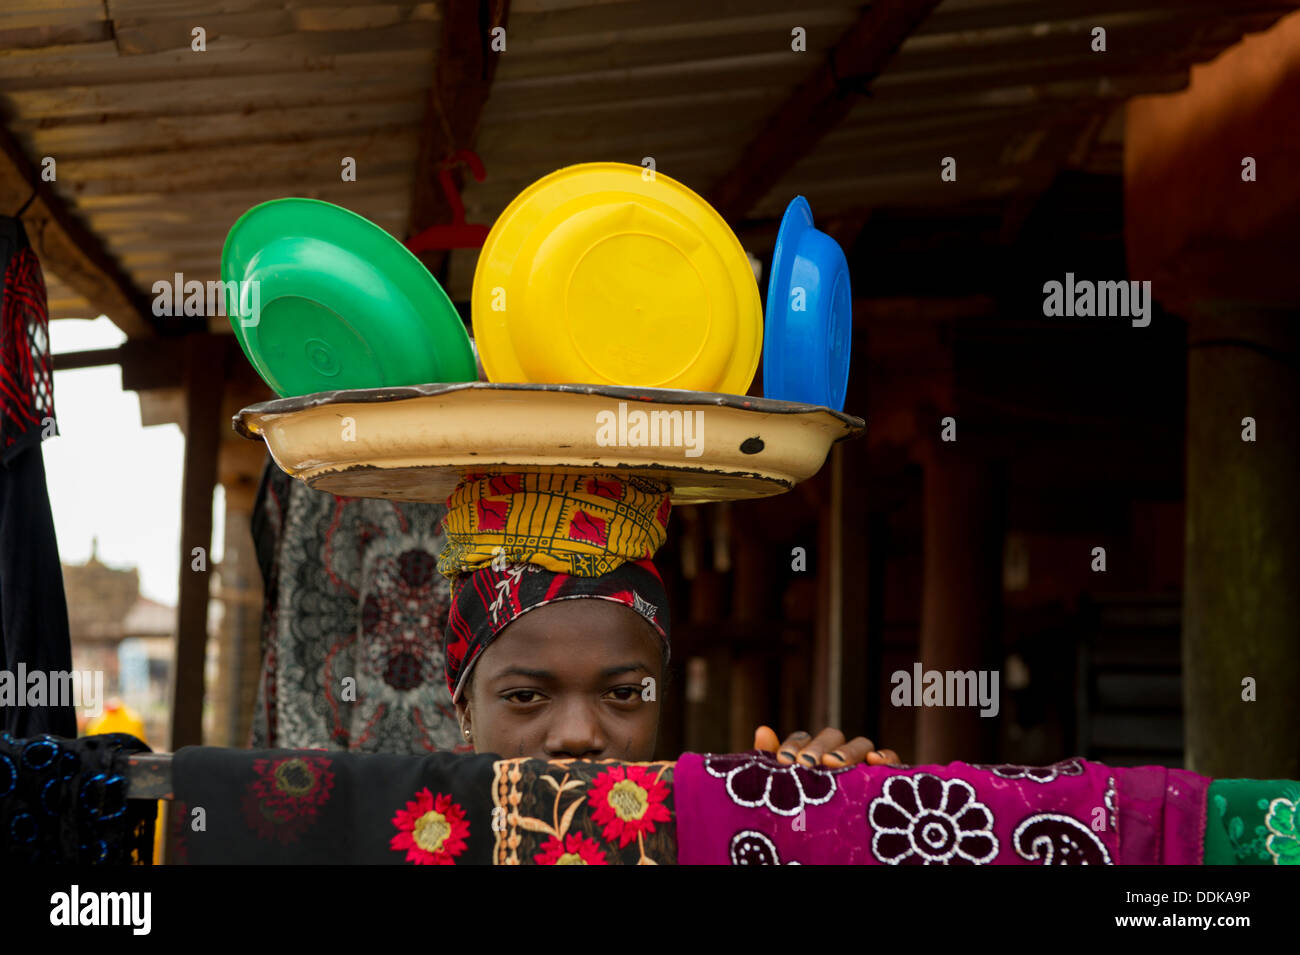 Black African woman head carrying dishes Stock Photo